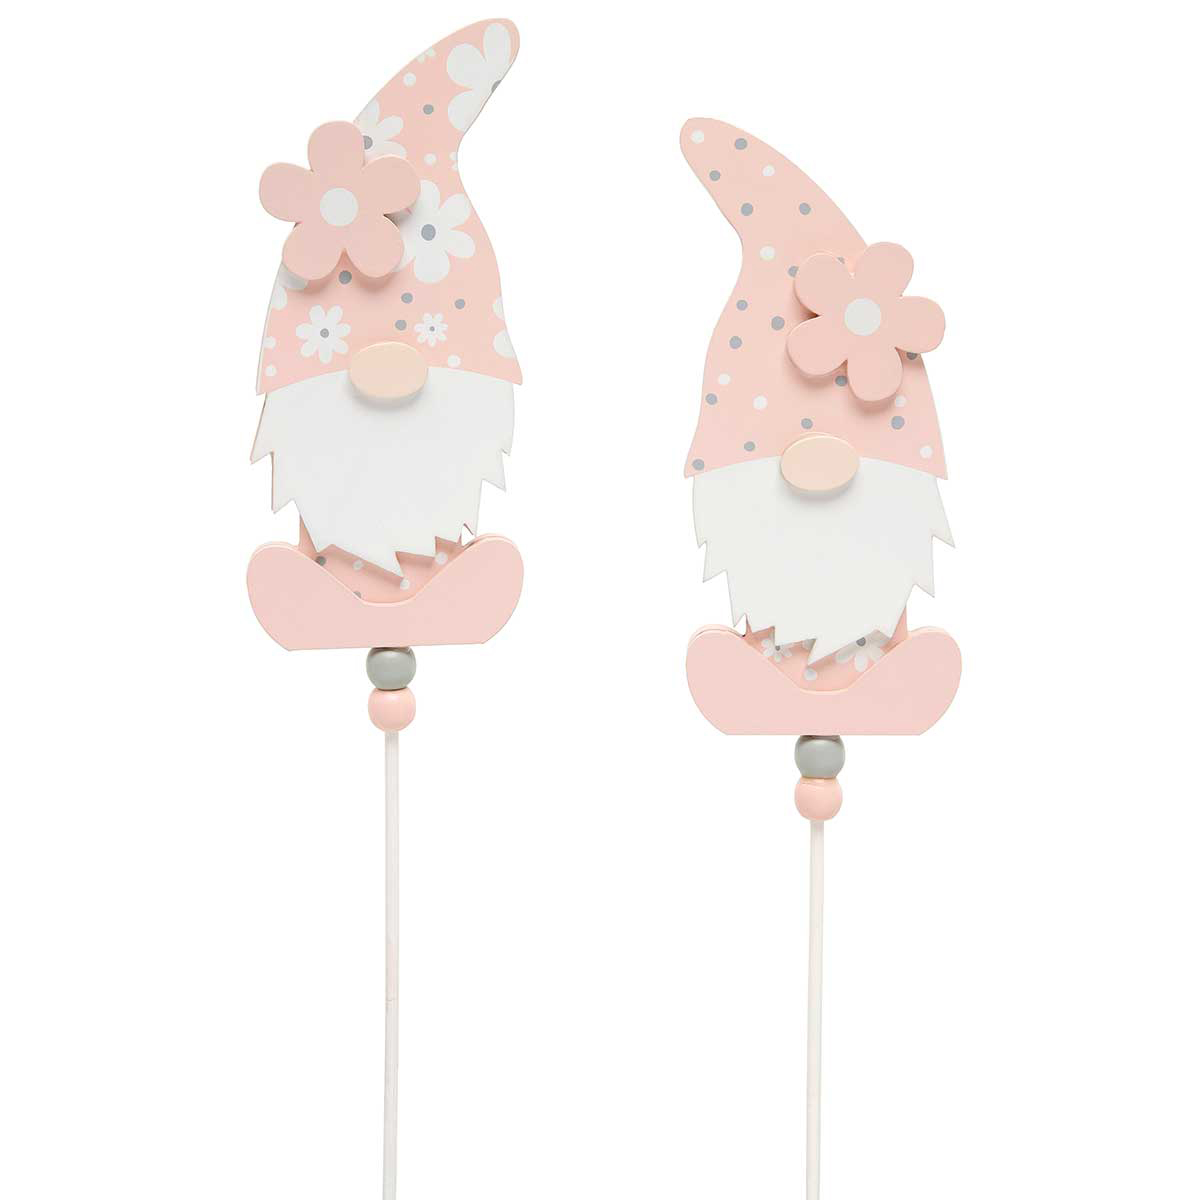 WHOOPSIE WOOD GNOME ON STICK PINK/WHITE PINDOT/DAISY